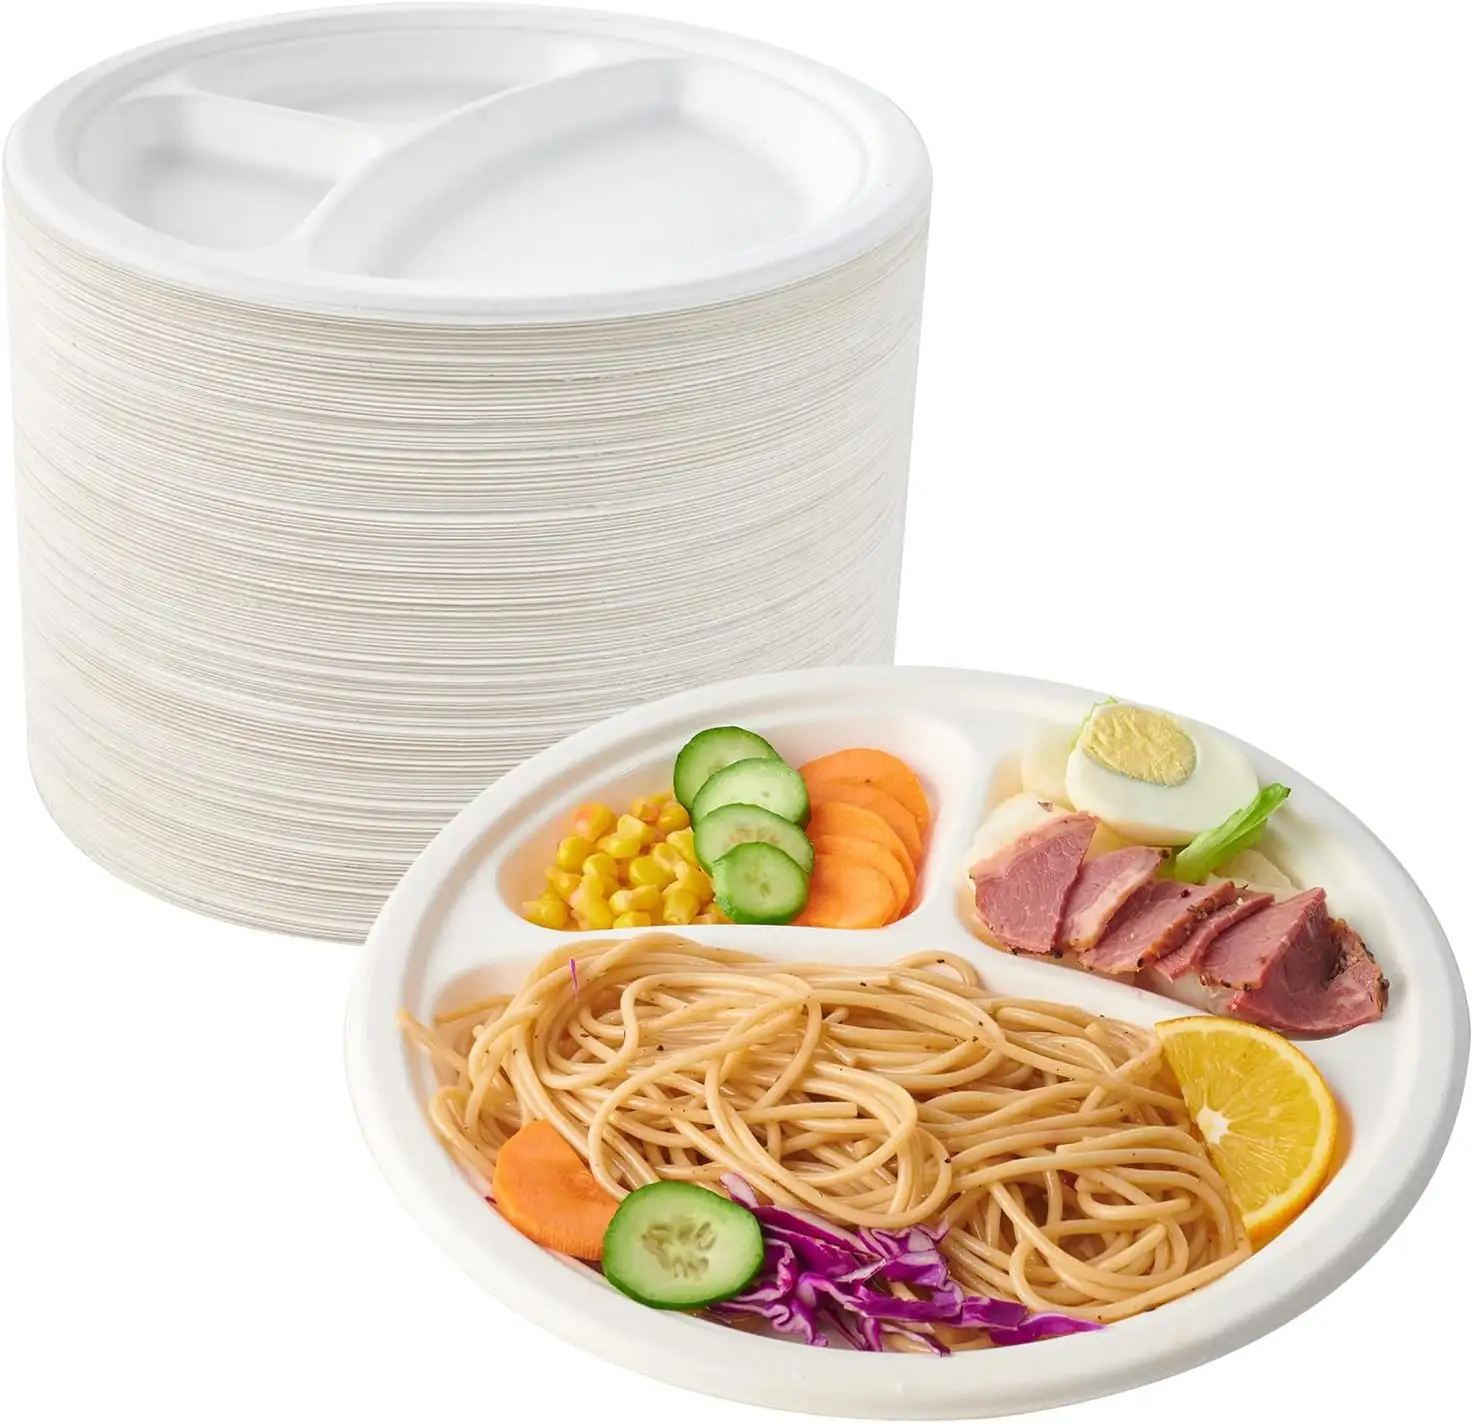 3 Compartment Plates, Heavy-Duty Disposable Biodegradable Paper Plates, Eco-Friendly Sugarcane Bagasse Divided Plates for Dinner